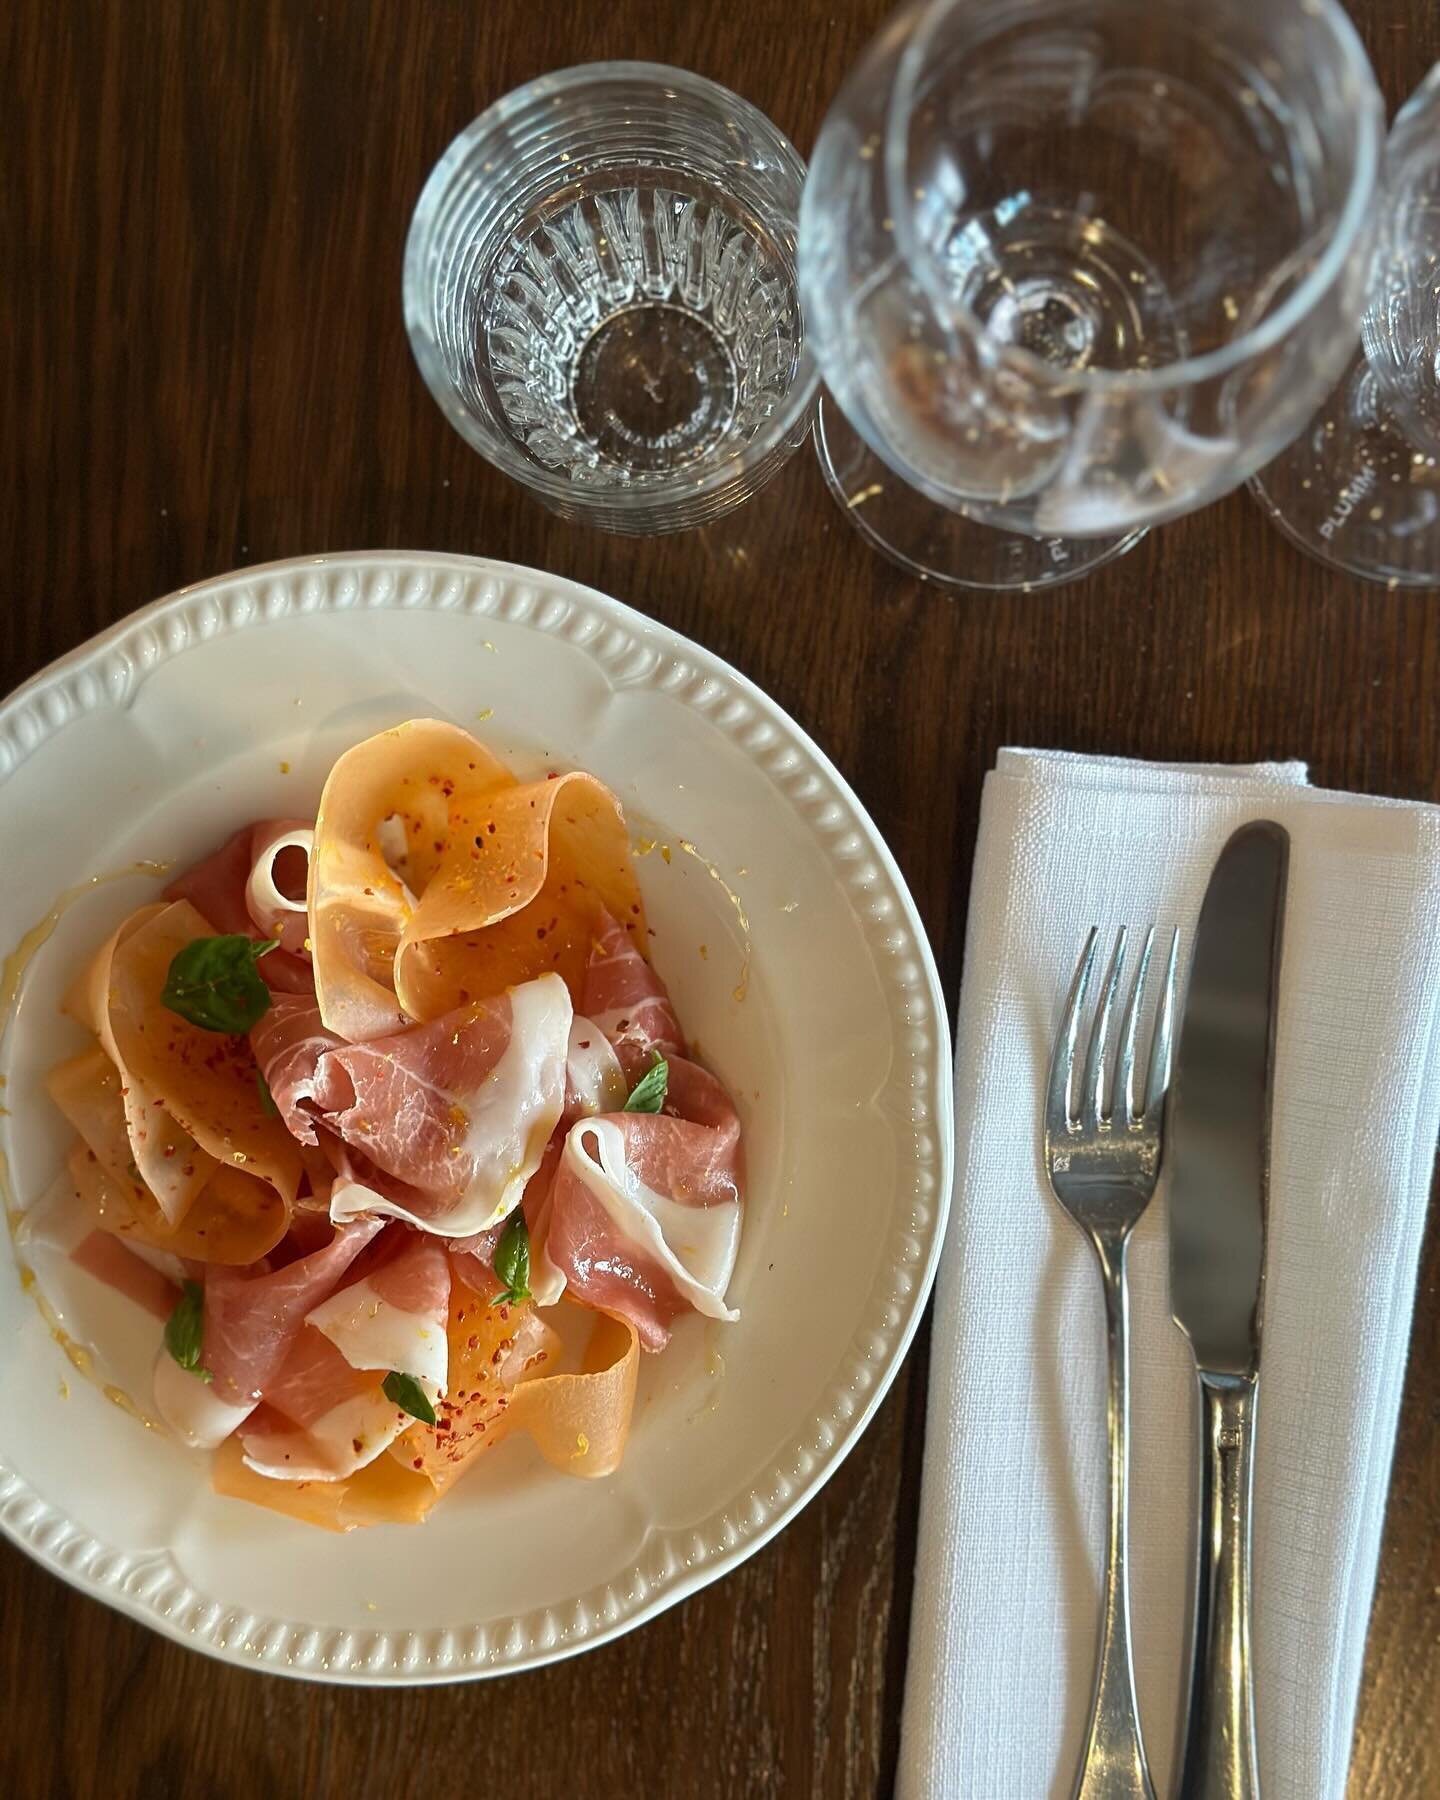 Hot days and refreshing dishes. 

Prosciutto San Daniele, melon and honey. 

Anchovies, burnt bay leaf olive oil and a slice of bread. 

Open until late tonight, walk ins welcome